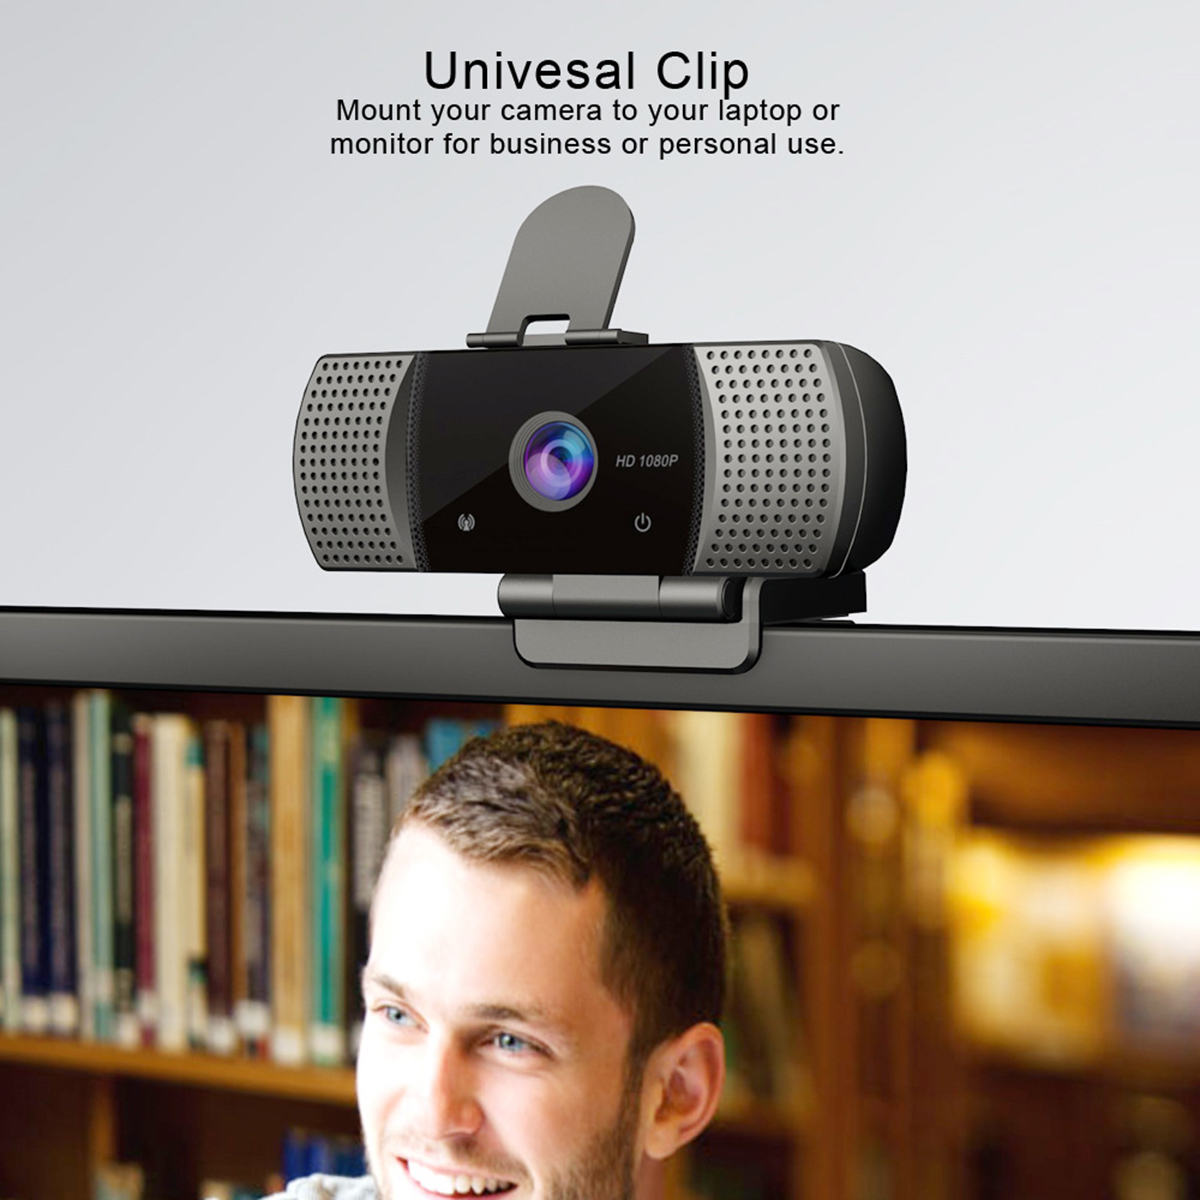 1080P-USB-Webcams-PC-Laptop-Video-Computer-Camera-Built-in-Microphone-Drive-Free-1771465-5